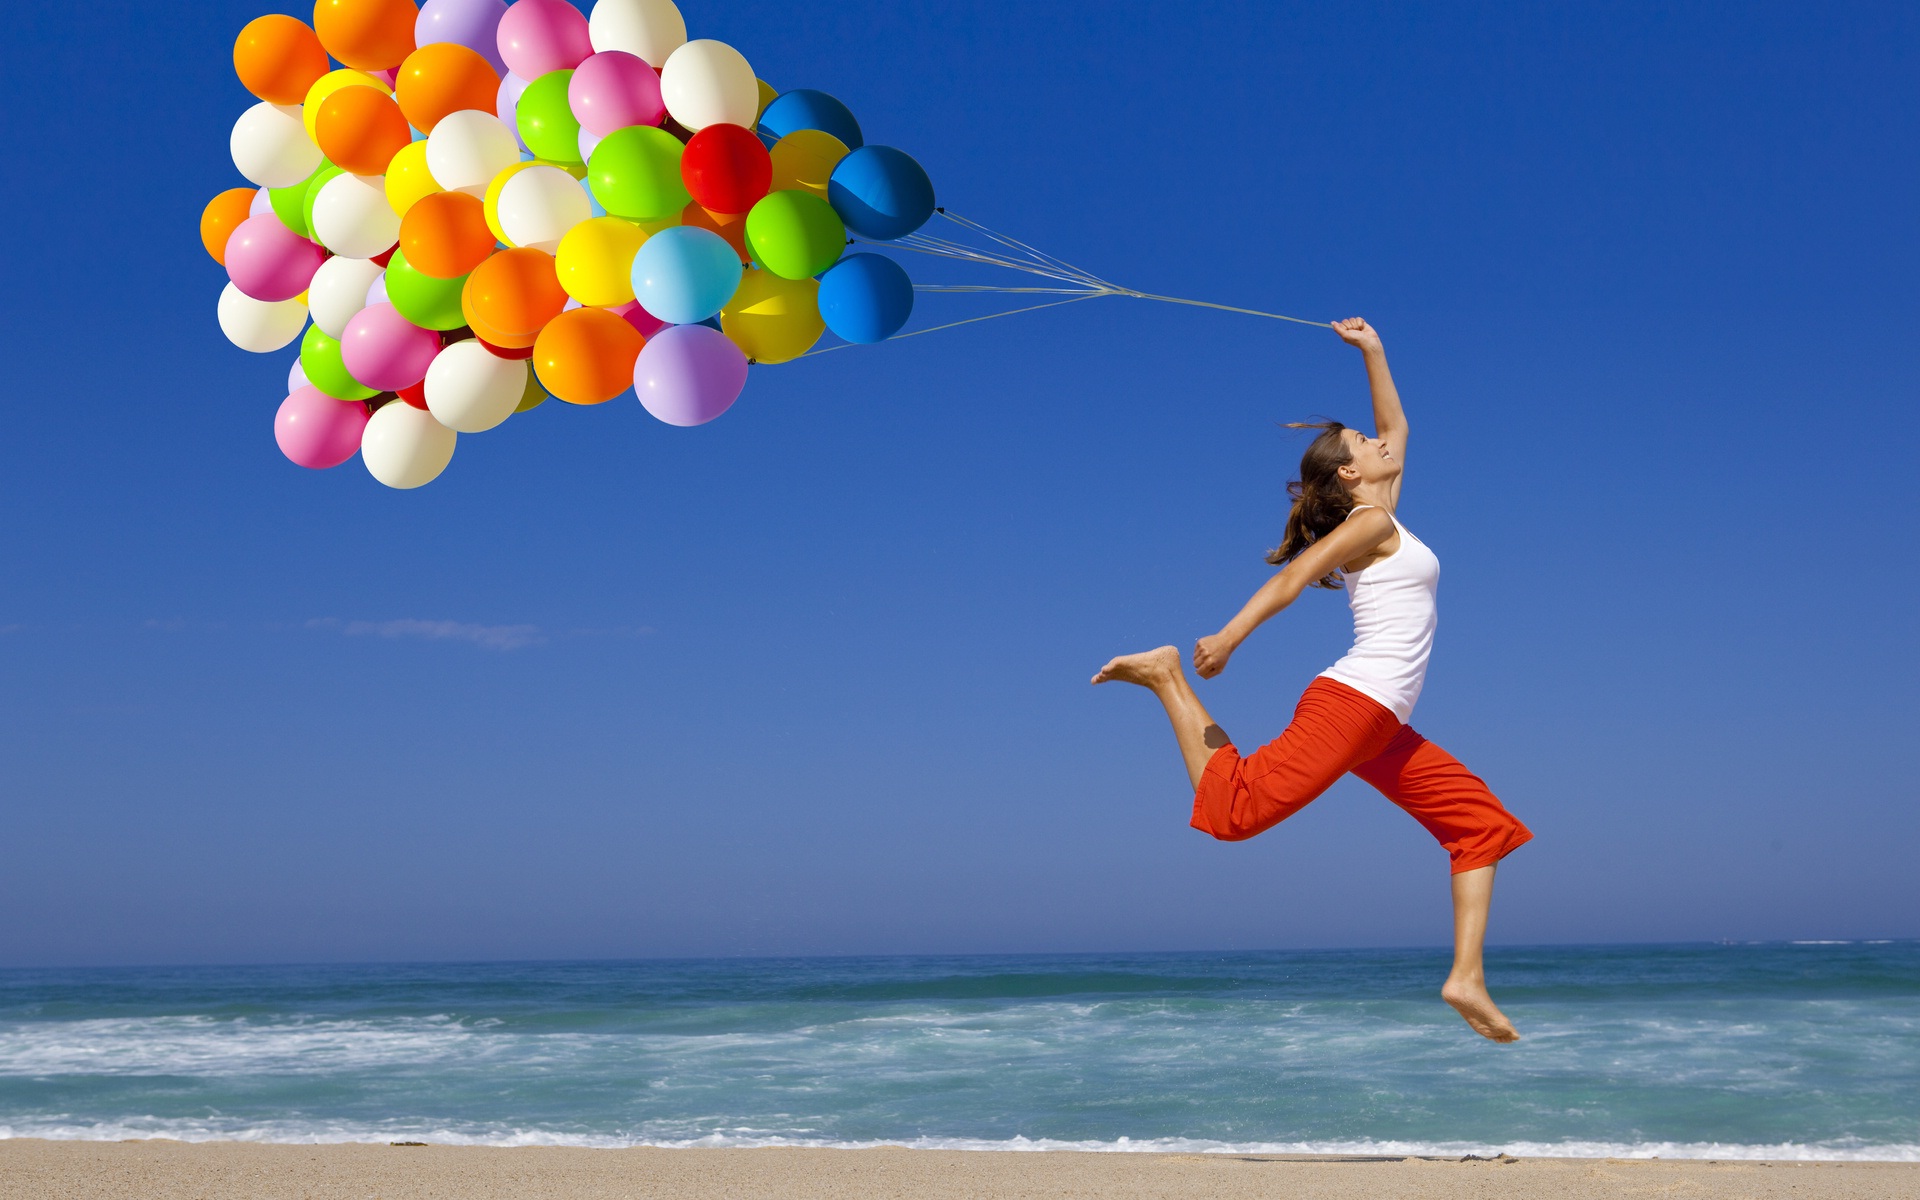 Youngster girl with balloons happy | HD Wallpapers Rocks